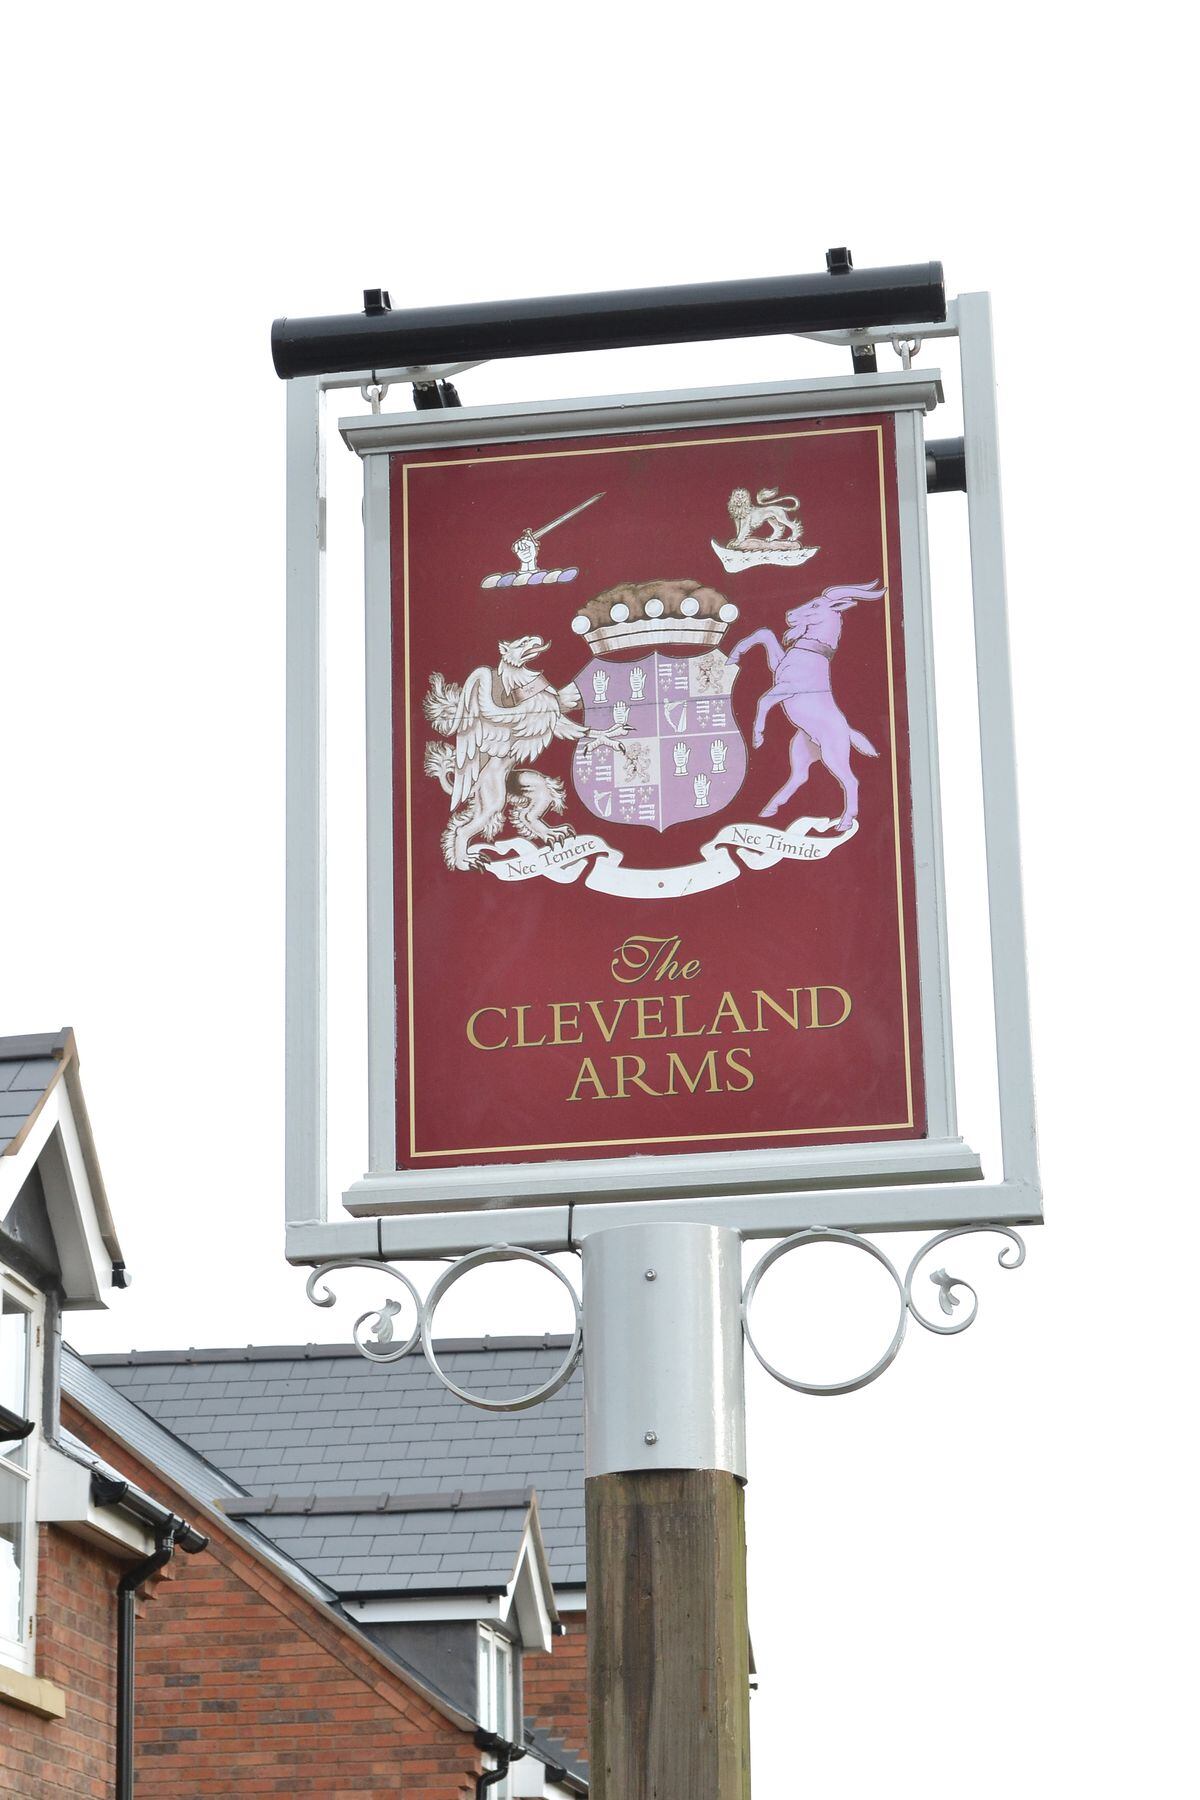 High Ercall pic. Pub sign for the Cleveland Arms at High Ercall. Picture taken on Wednesday, January 13, 2016. There is a notice which says the pub is closed i.e... 'Our deep and sincere apologies to all our loyal customers. Due to ongoing adverse trading and major structural repairs and alterations being required, the Cleveland Arms public house has again been forced to close...' Pub closures. High Ercall pub. High Ercall village. Library code: High Ercall pic 2016. High Ercall 2016.. 